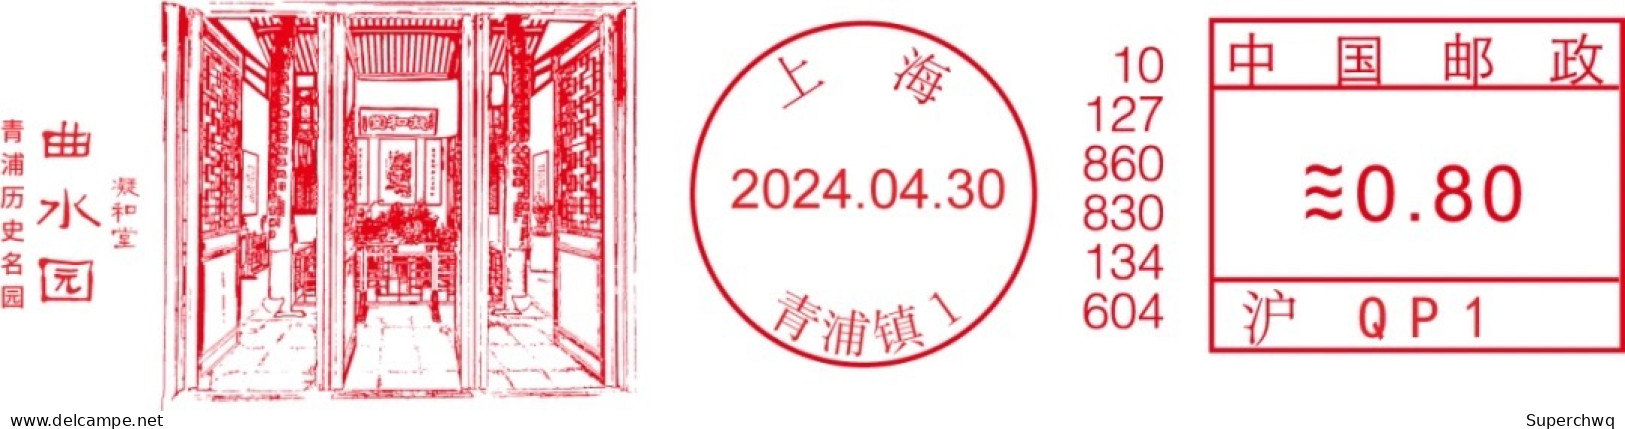 China cover "Qingpu Historical Park - Qushui Park" (Shanghai) Postage Machine Stamped First Day Actual Delivery Seal - Omslagen